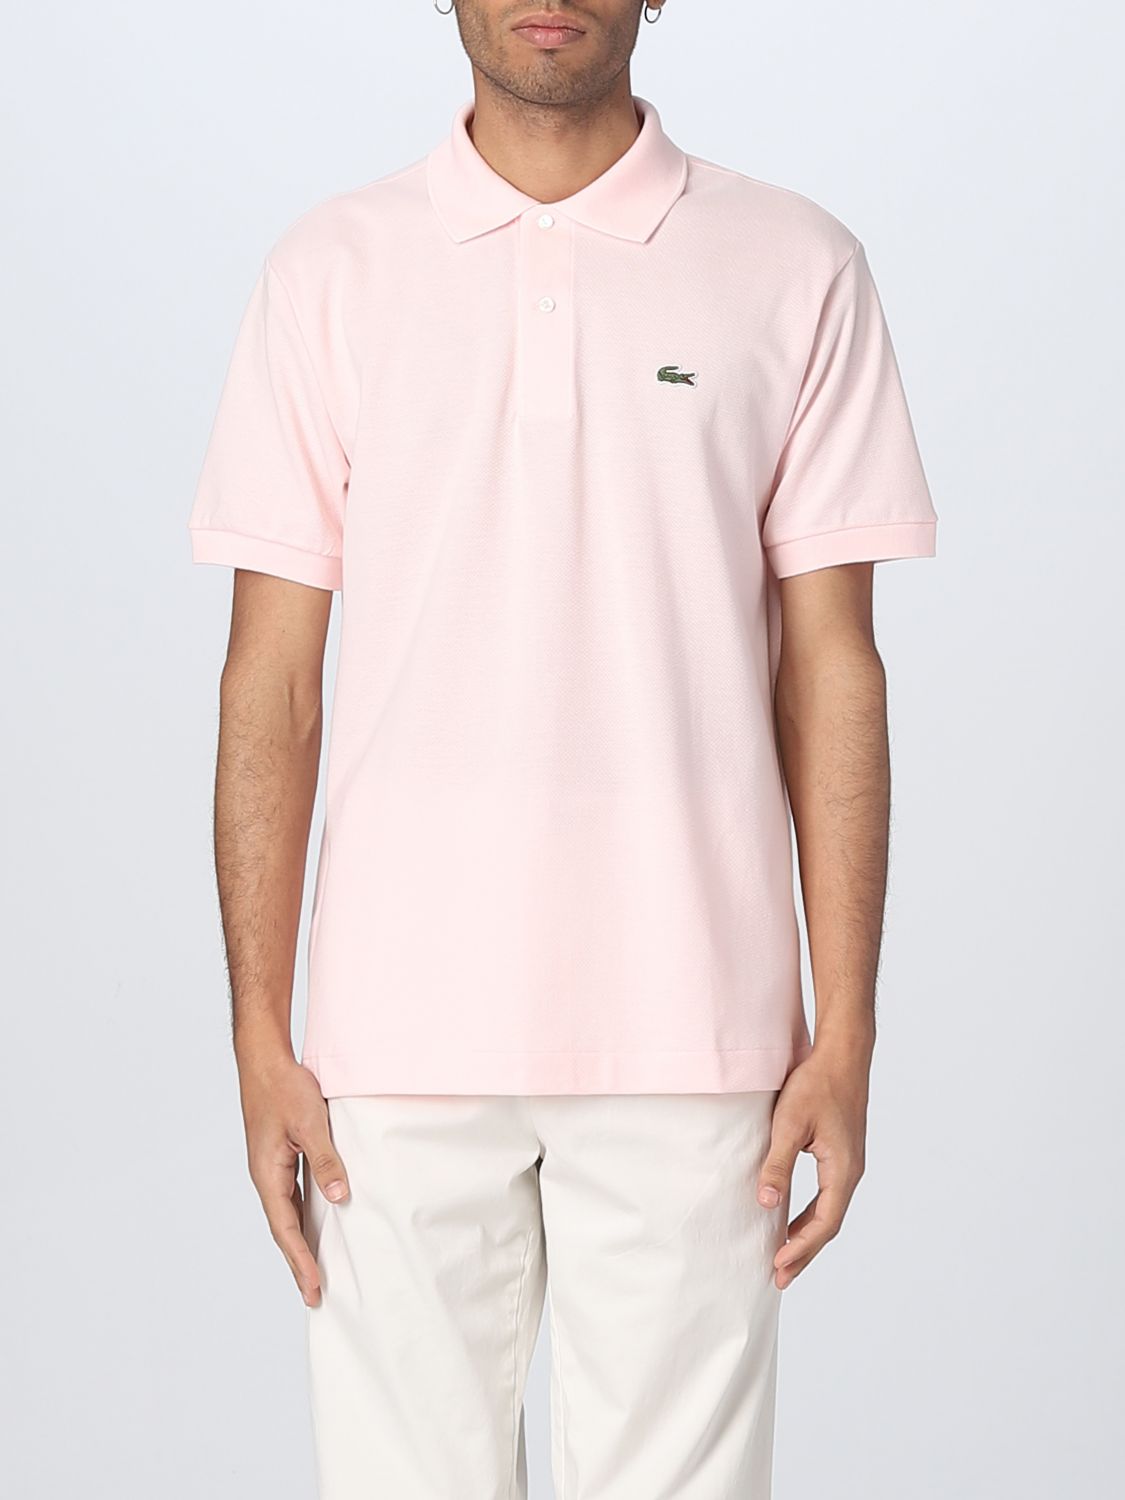 LACOSTE POLO衫 LACOSTE 男士 颜色 粉色,380829010